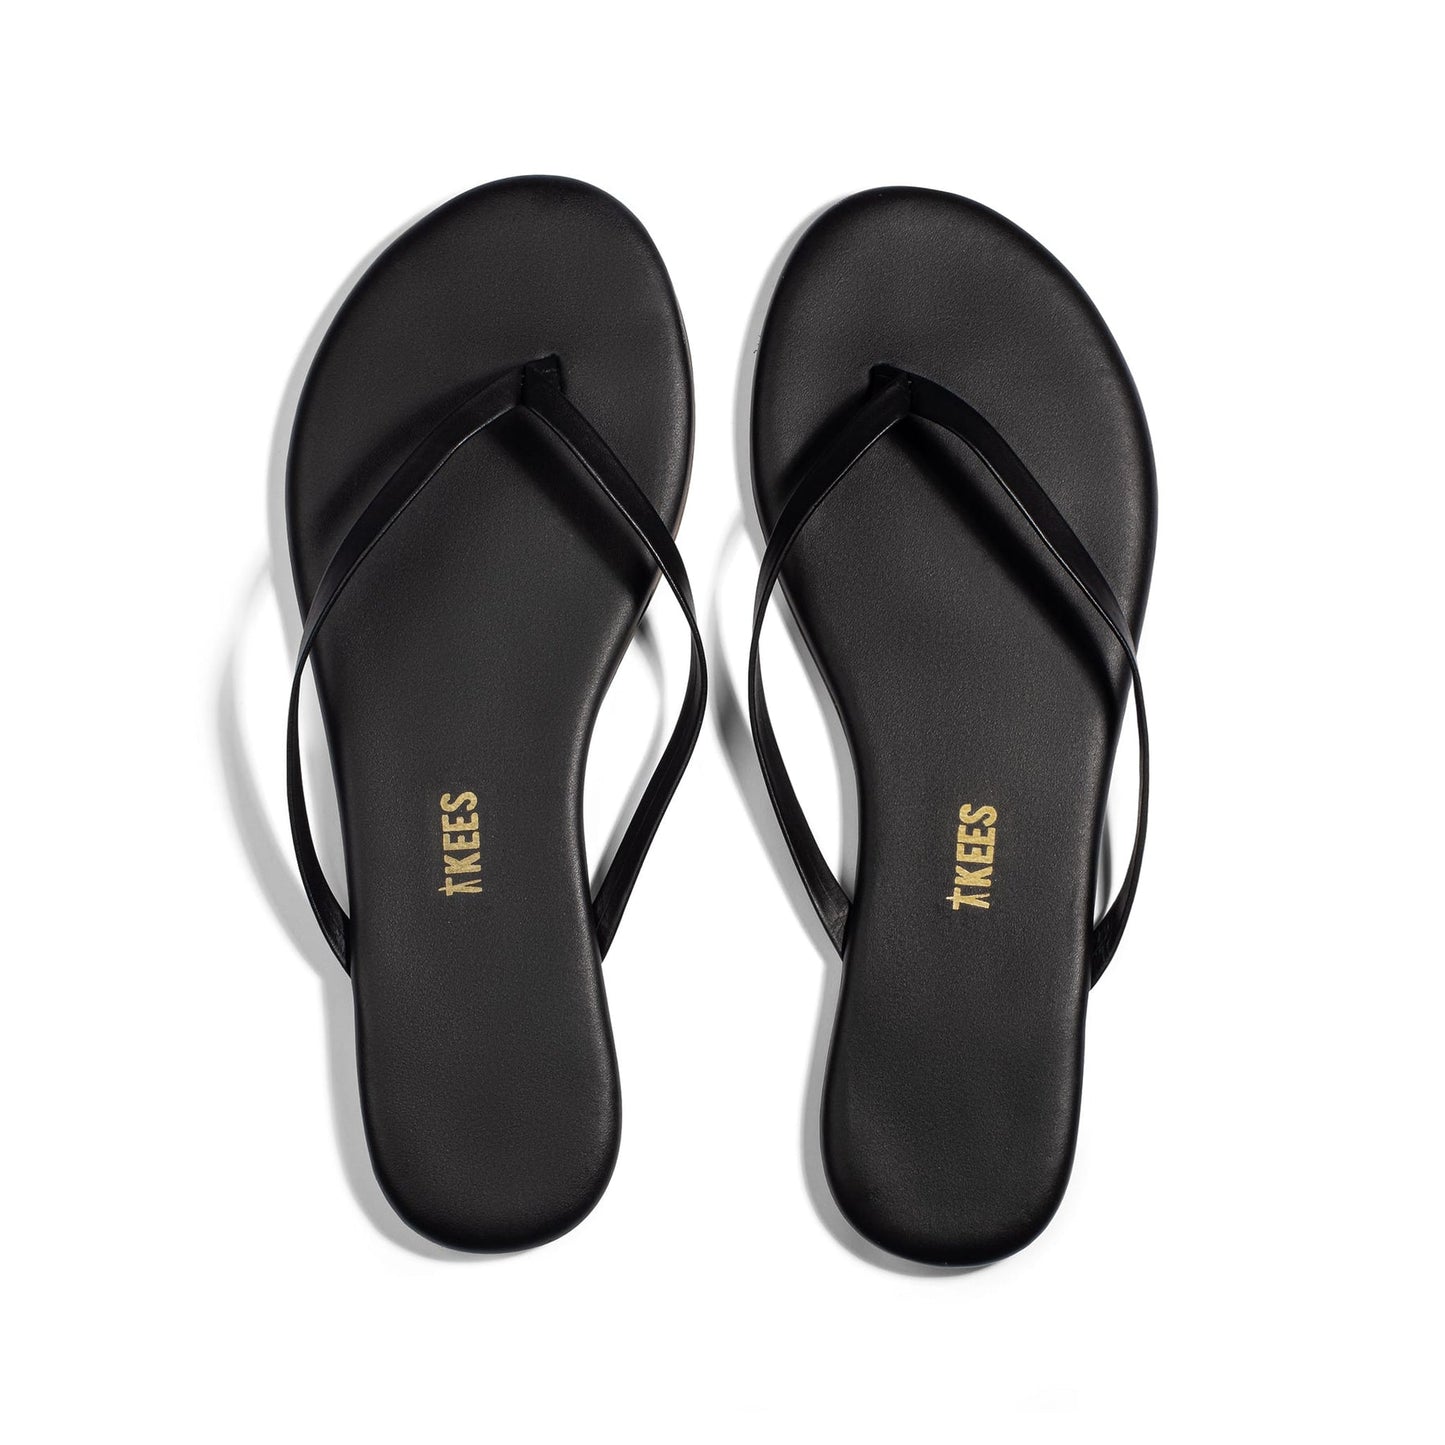 Liners Flip Flop - Sable TKEES